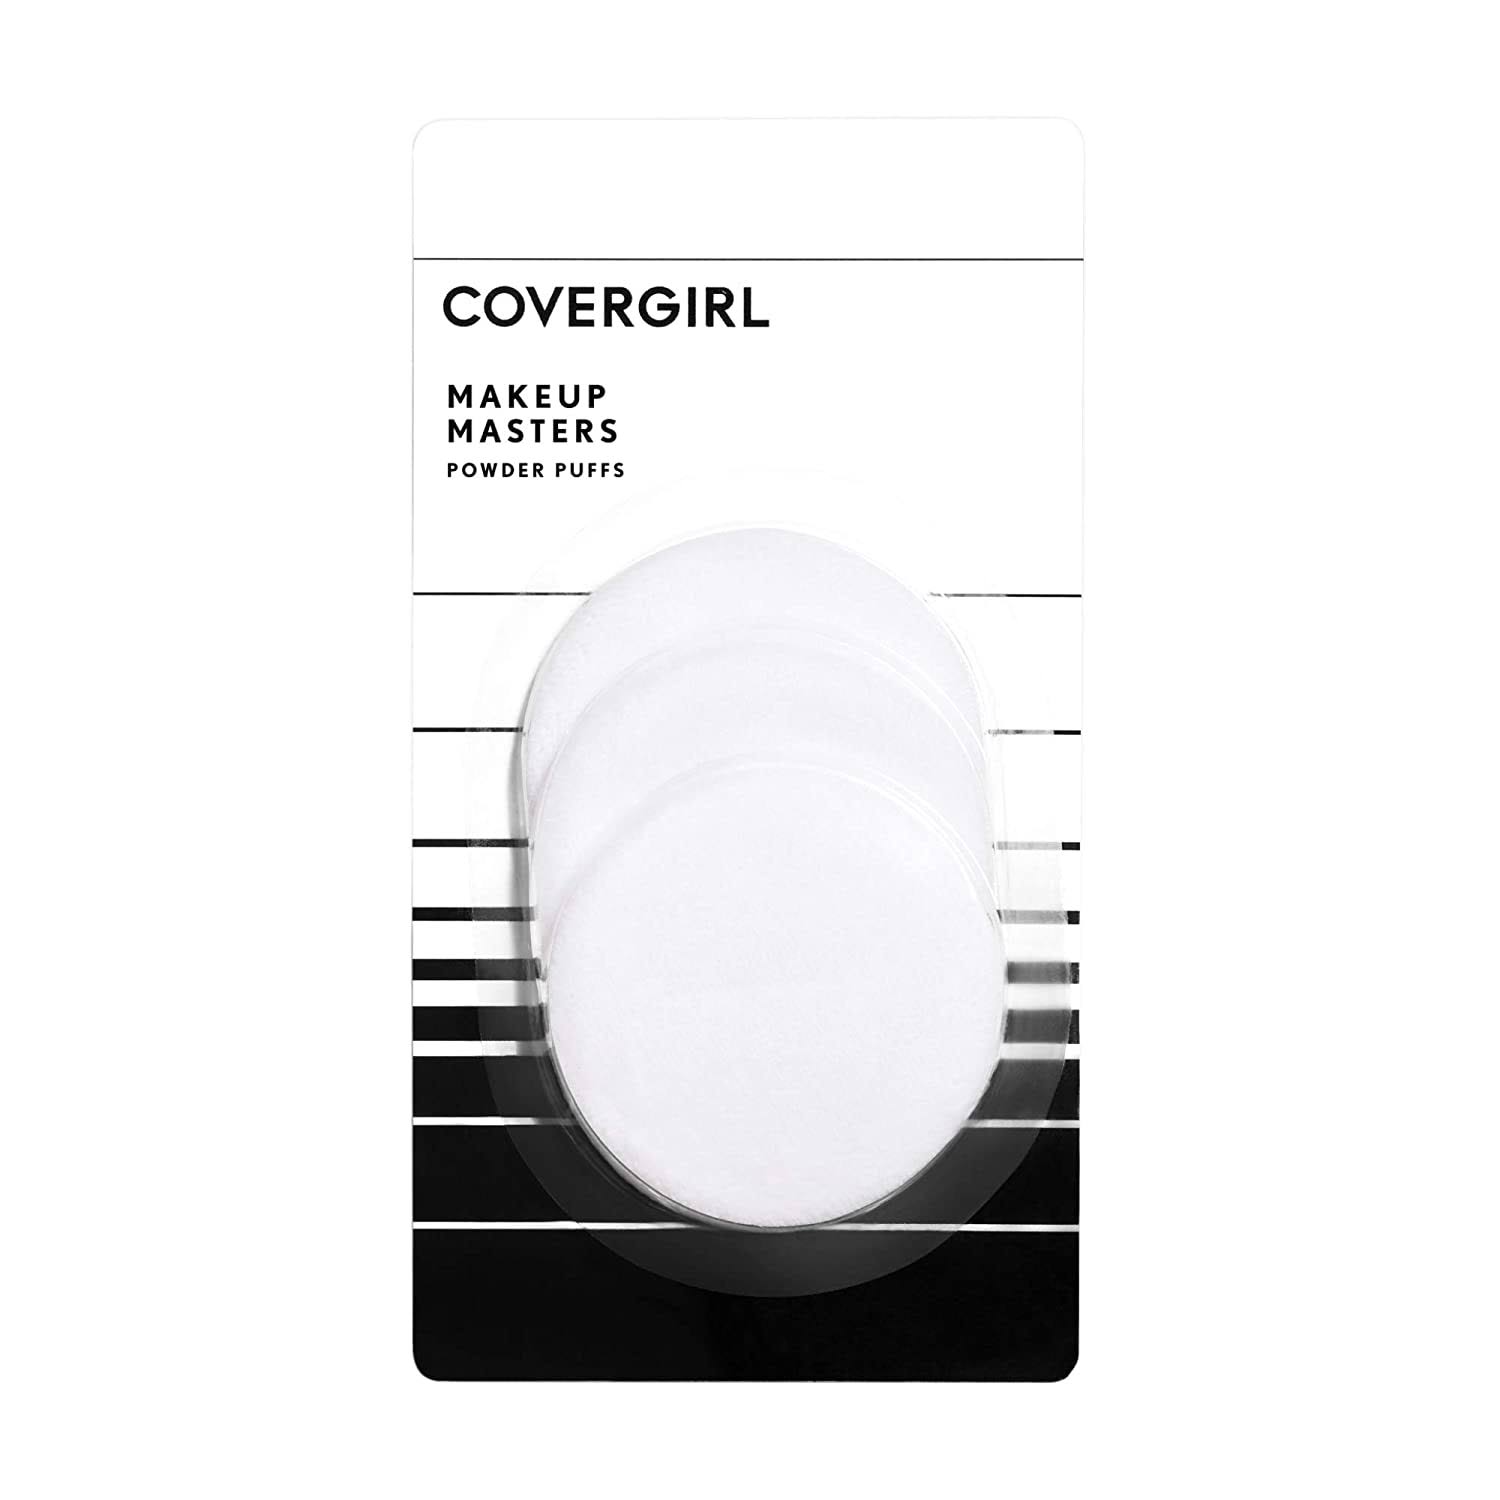 Covergirl Makeup Masters Powder Puffs - 3 Pack